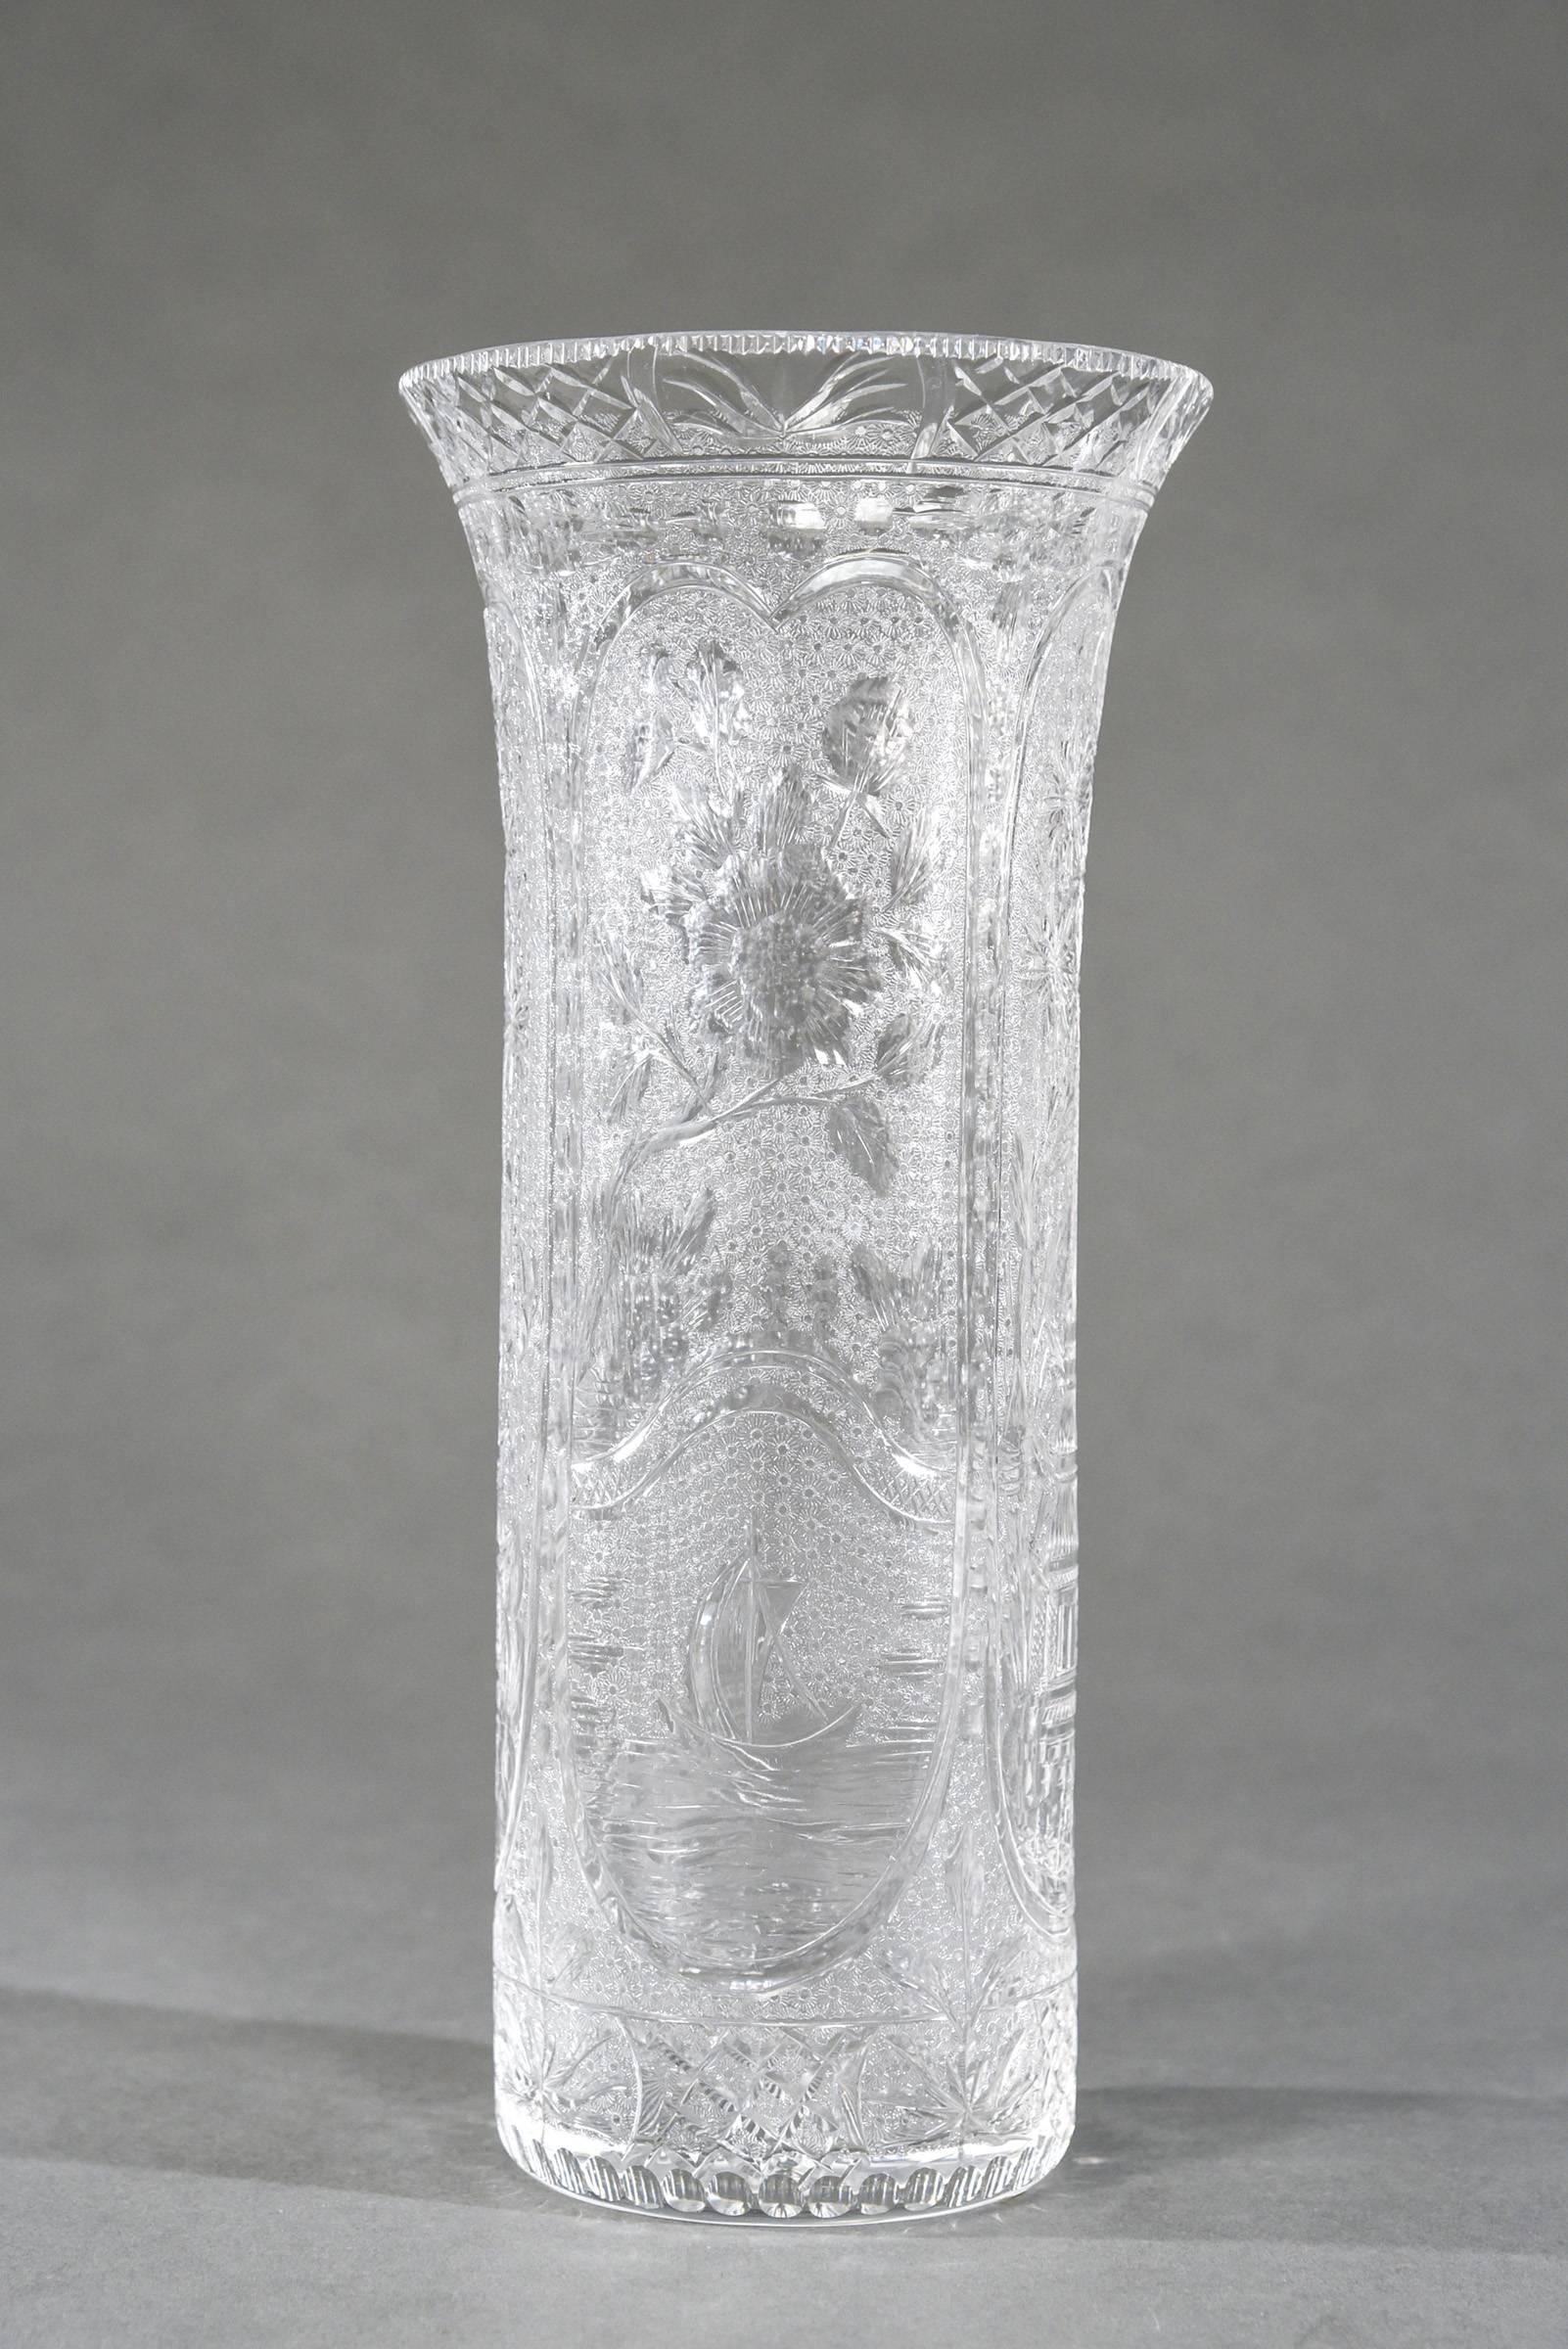 This is a rare handblown crystal vase made by Stevens and Williams, England, circa 1910. The 12.25